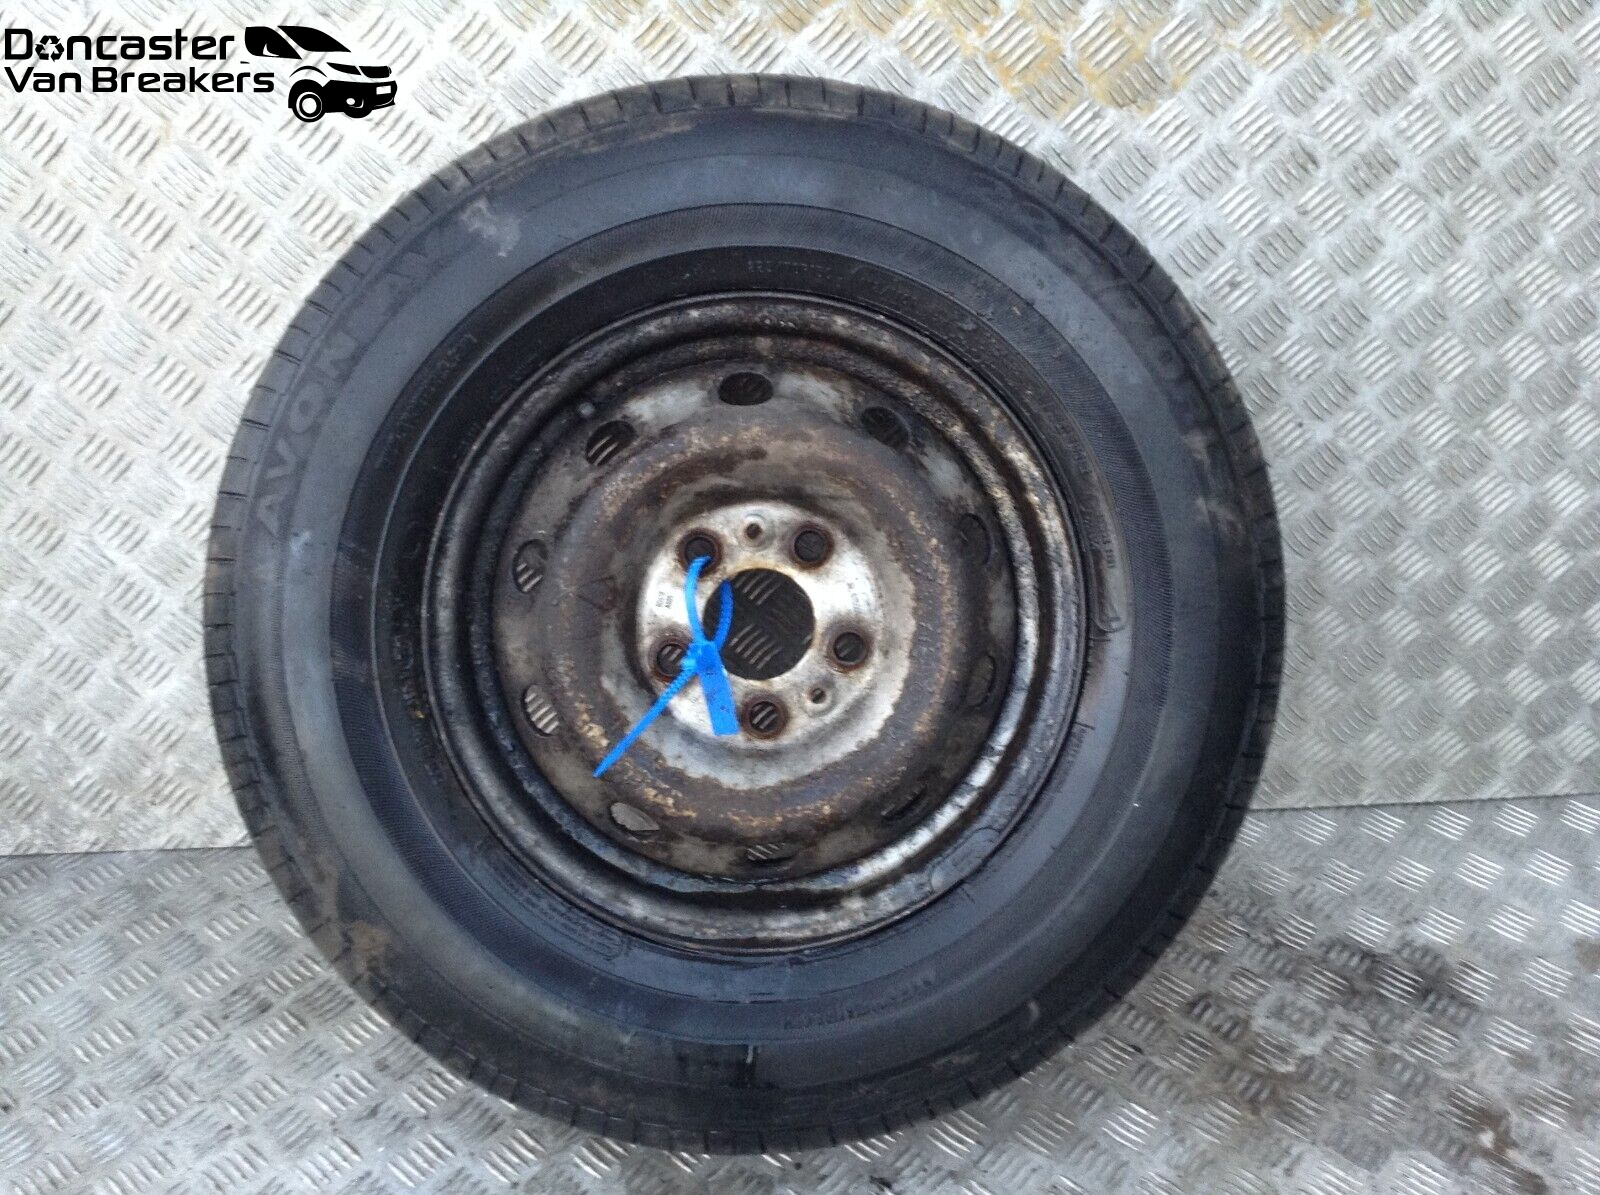 IVECO DAILY 2005 35512 STEEL WHEEL AND TYRE 225/70/15 5STUD 10MM TREAD